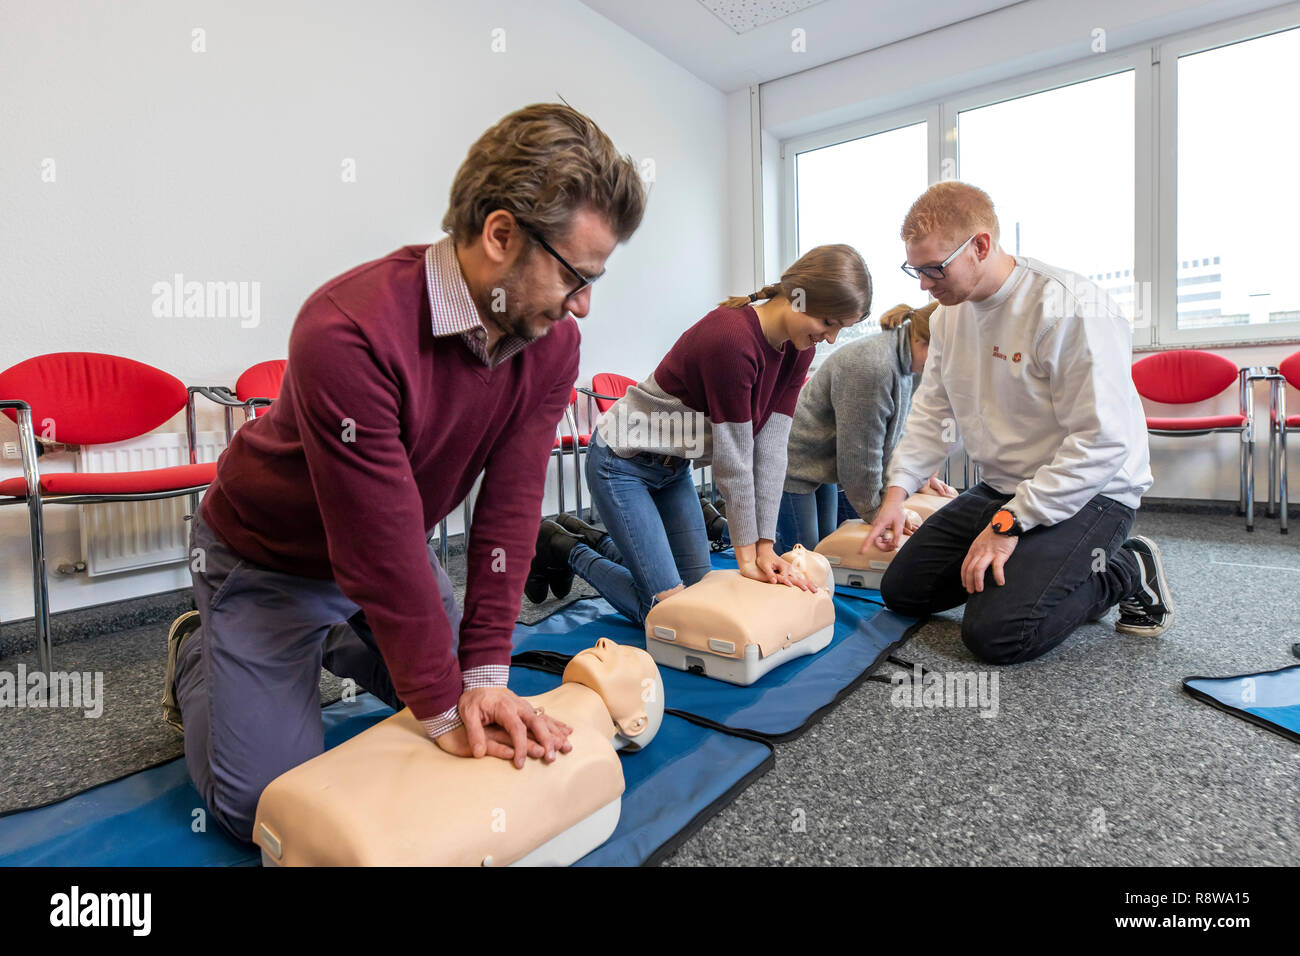 First aid course, first aid training in emergencies, emergencies, practice training, resuscitation, cardiopulmonary resuscitation, exercise doll, Stock Photo